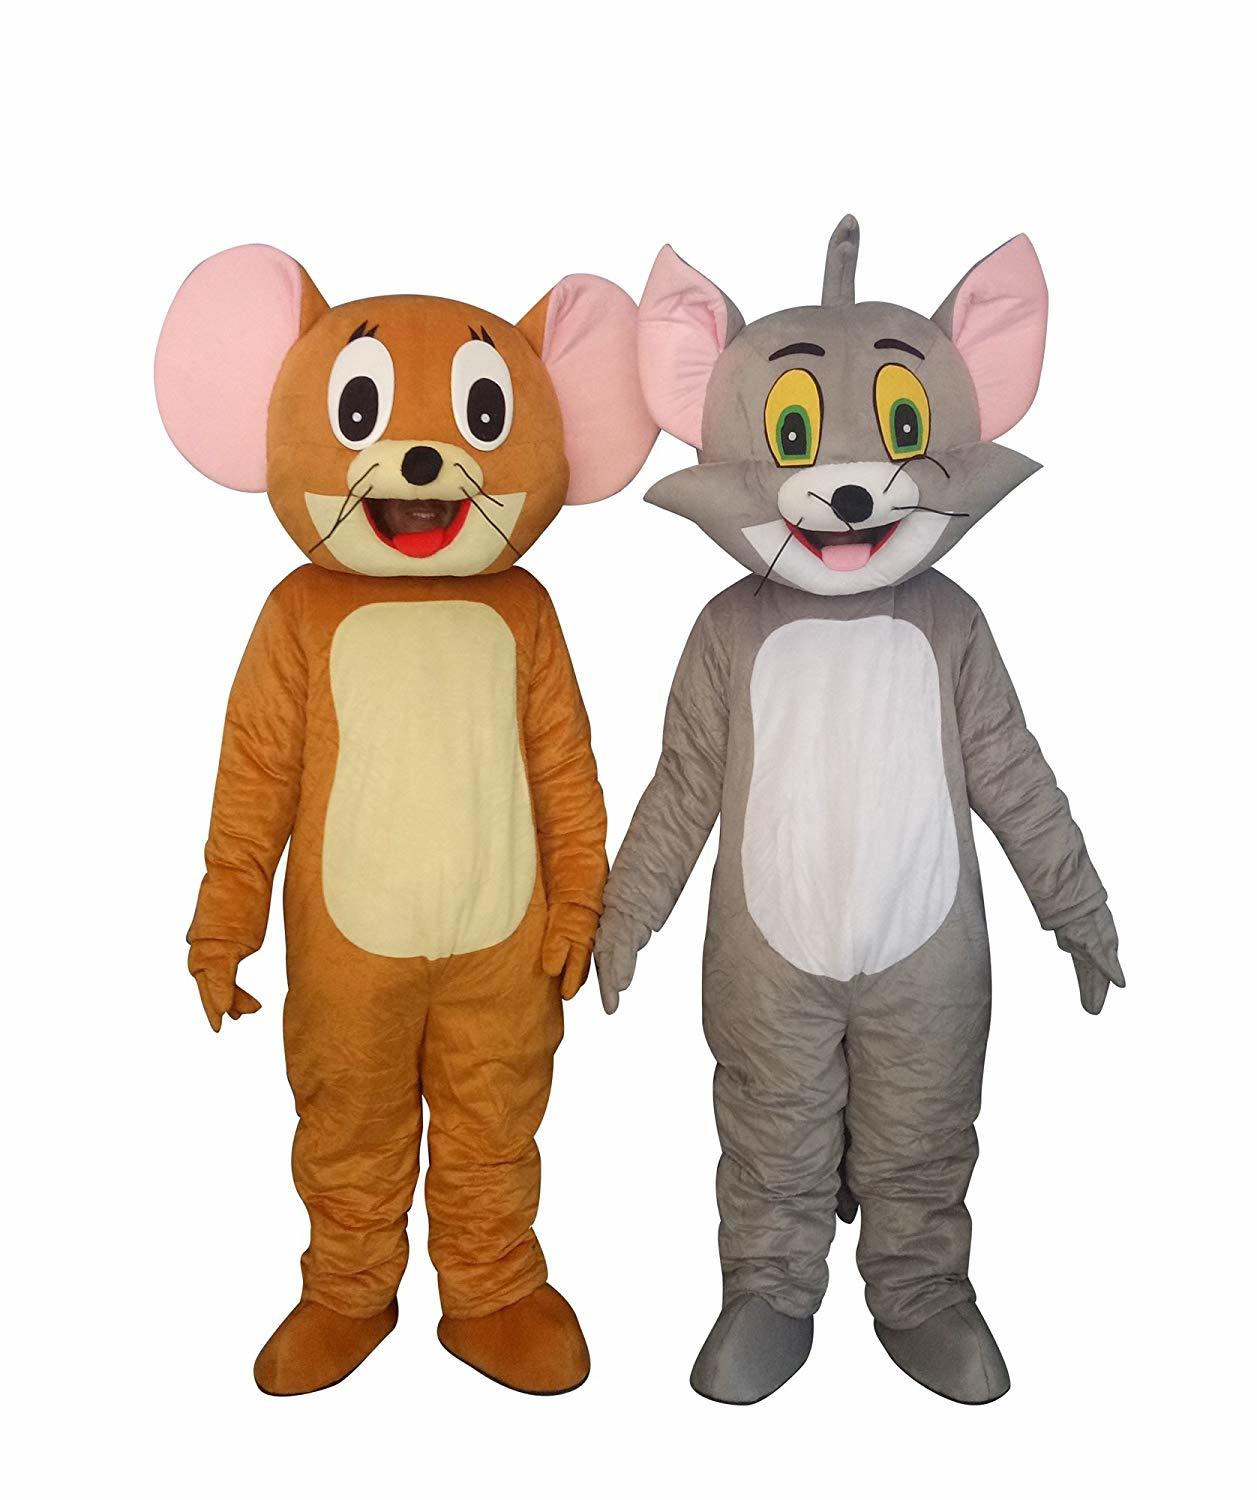 Sinoocean Tom Cat and Jerry Mouse Adult Mascot Costume.